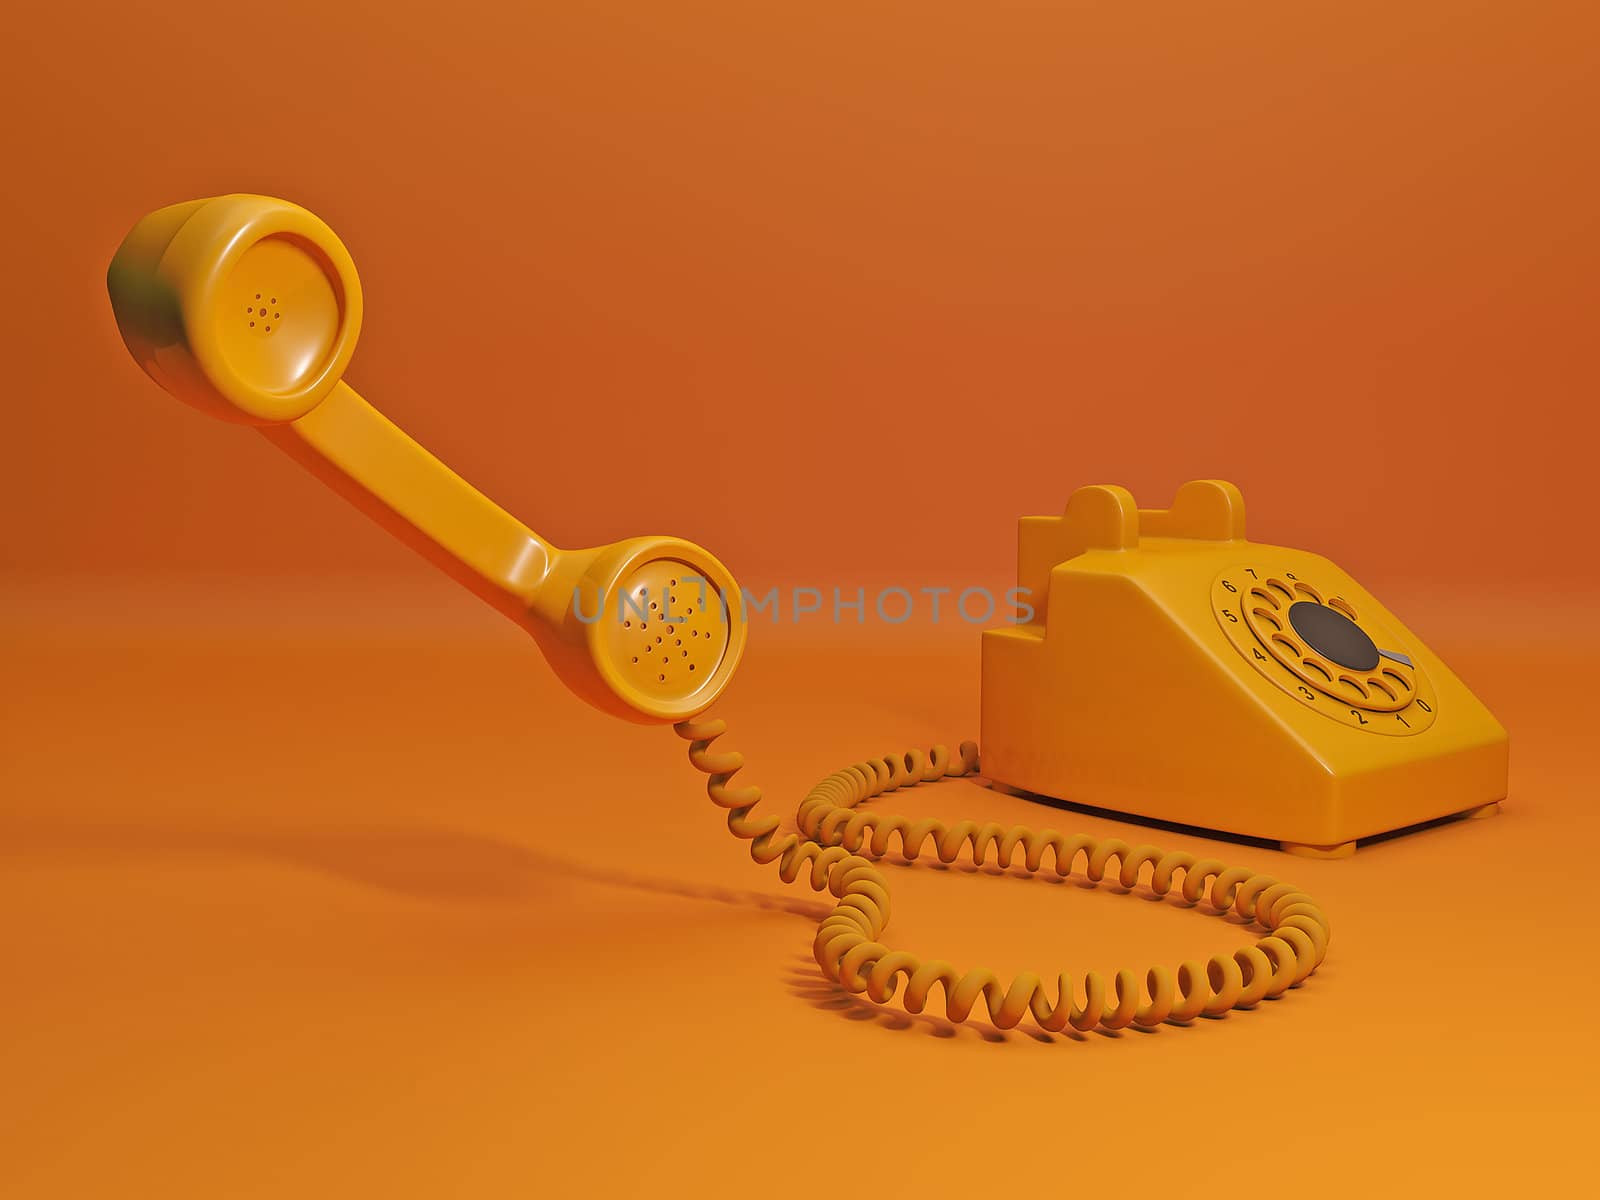 Call to order a taxi. Orange phone and the handset is close to t by kolobsek